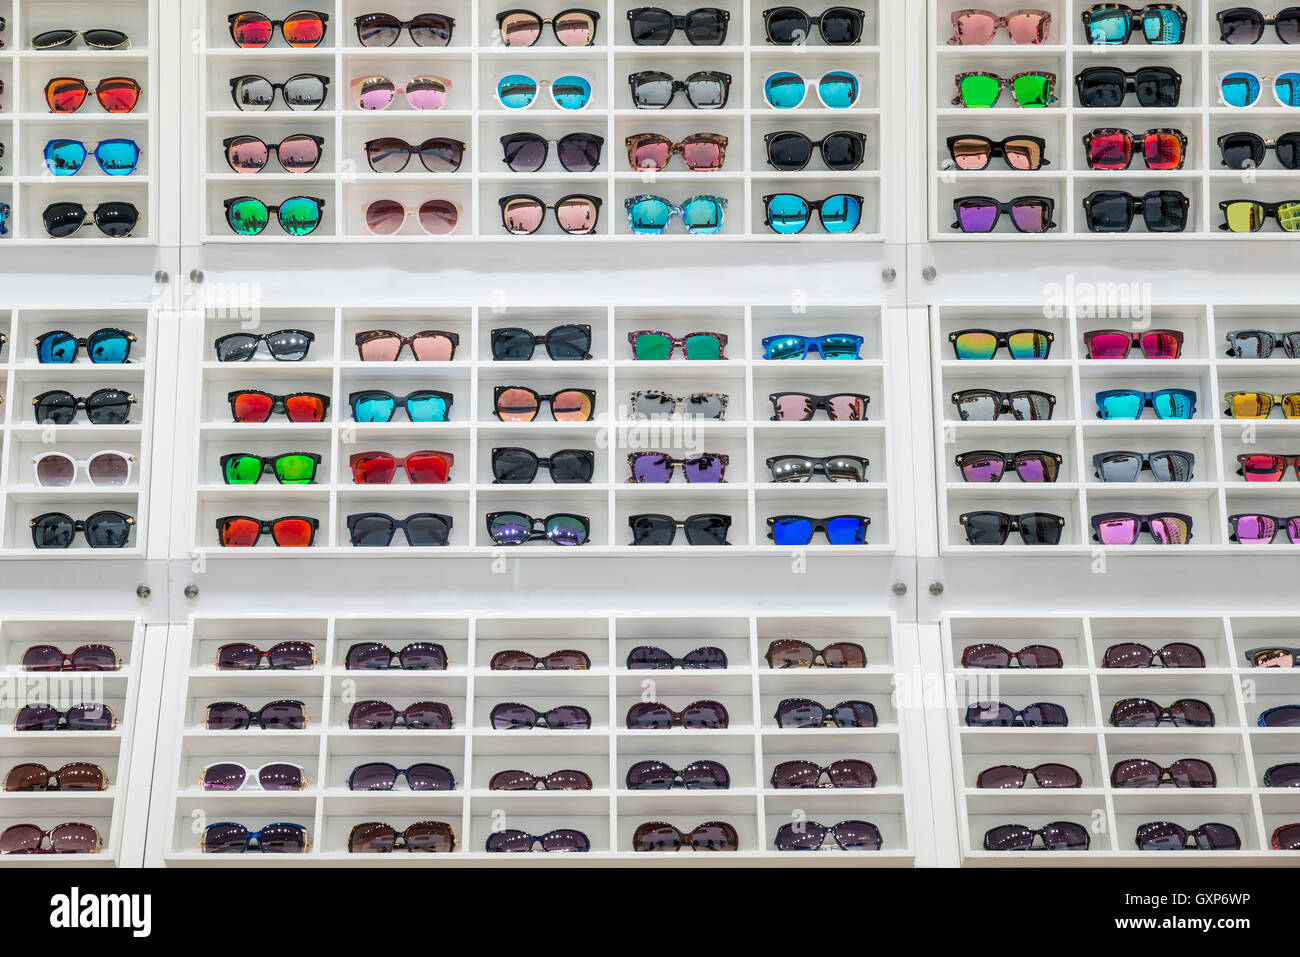 Sunglasses on sale display shelf in sunglasses shop at the city market Stock Photo